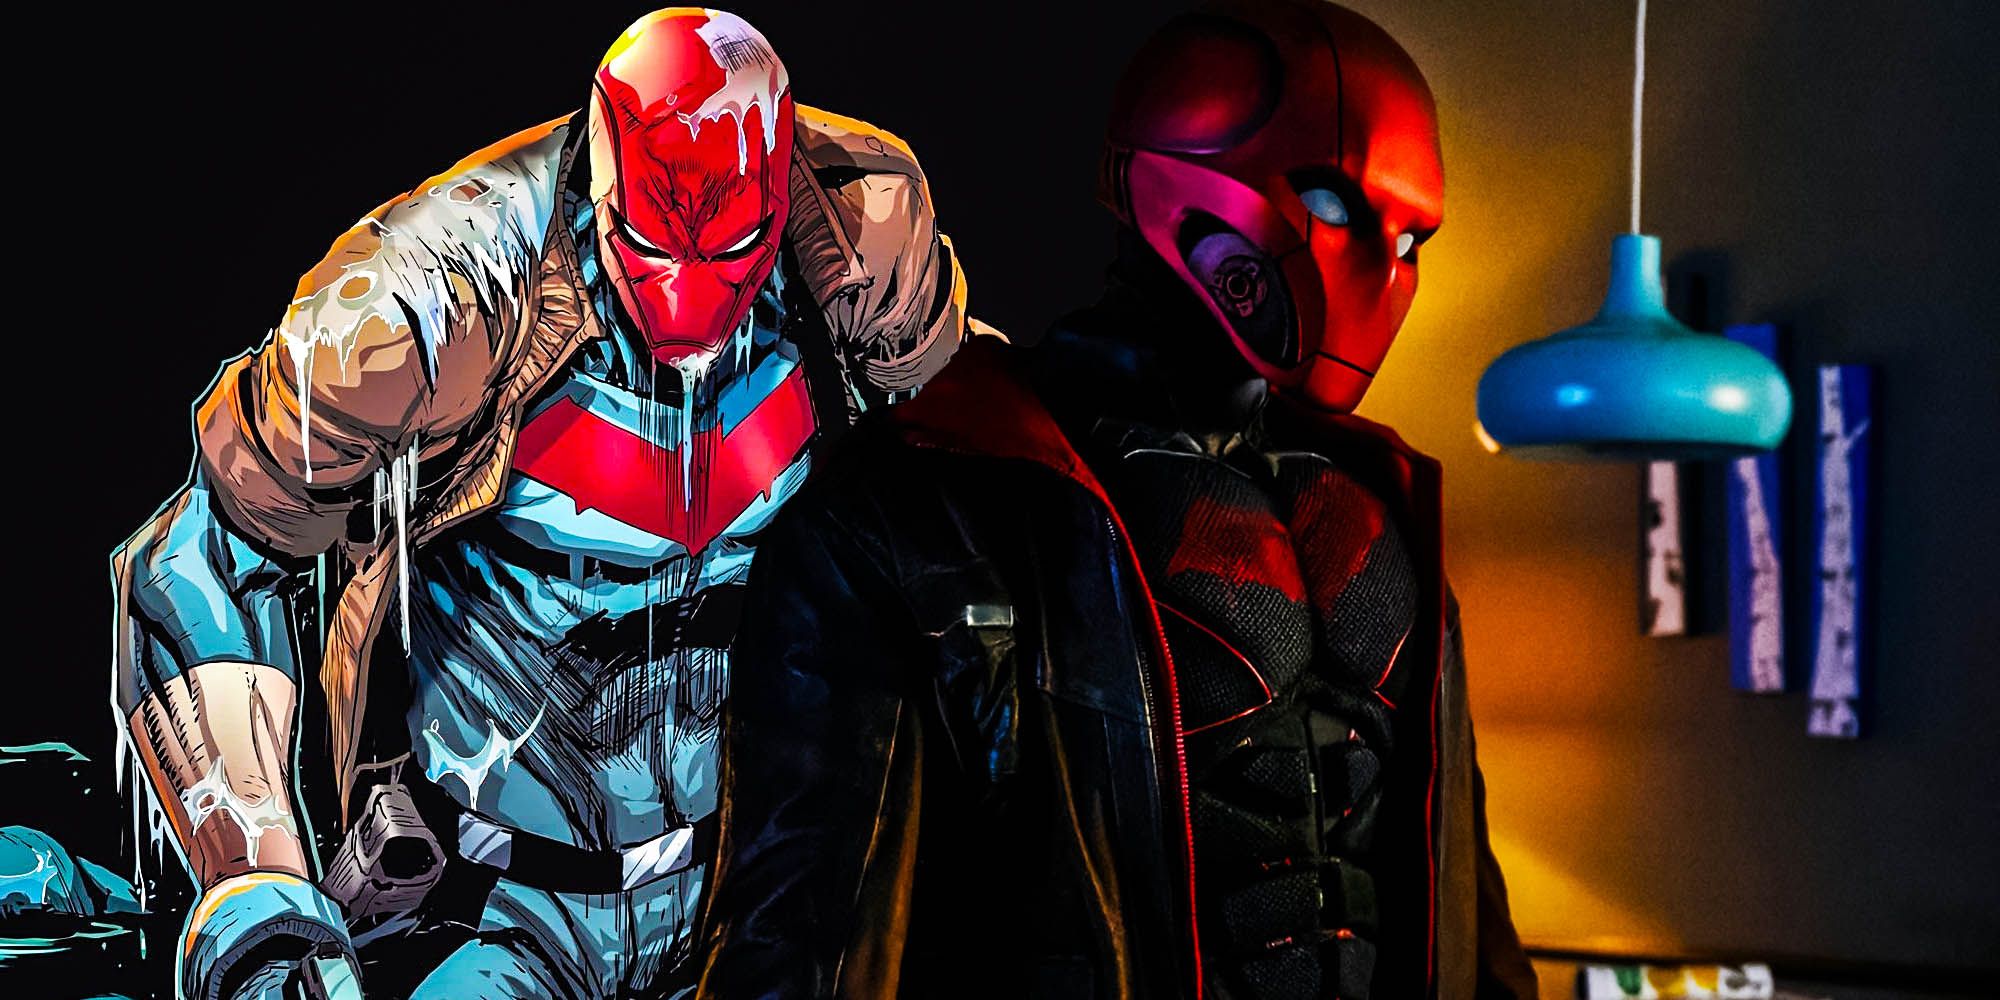 Titans setting up a more comic accurate red hood season 4